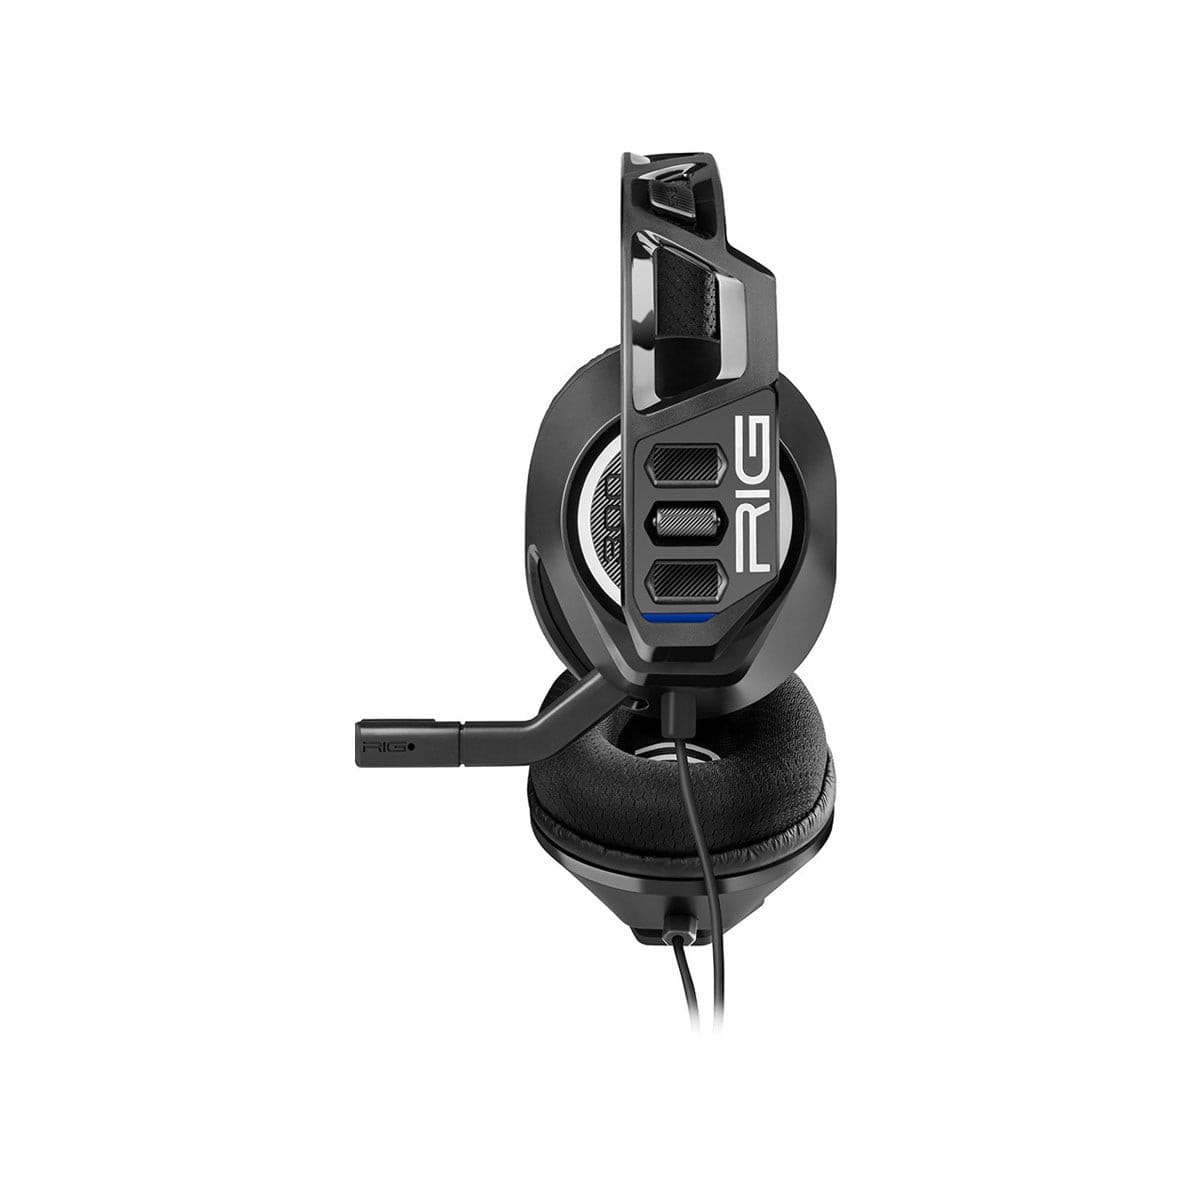 Rig 300 Pro HS Gaming Headset for PlayStation - Black.